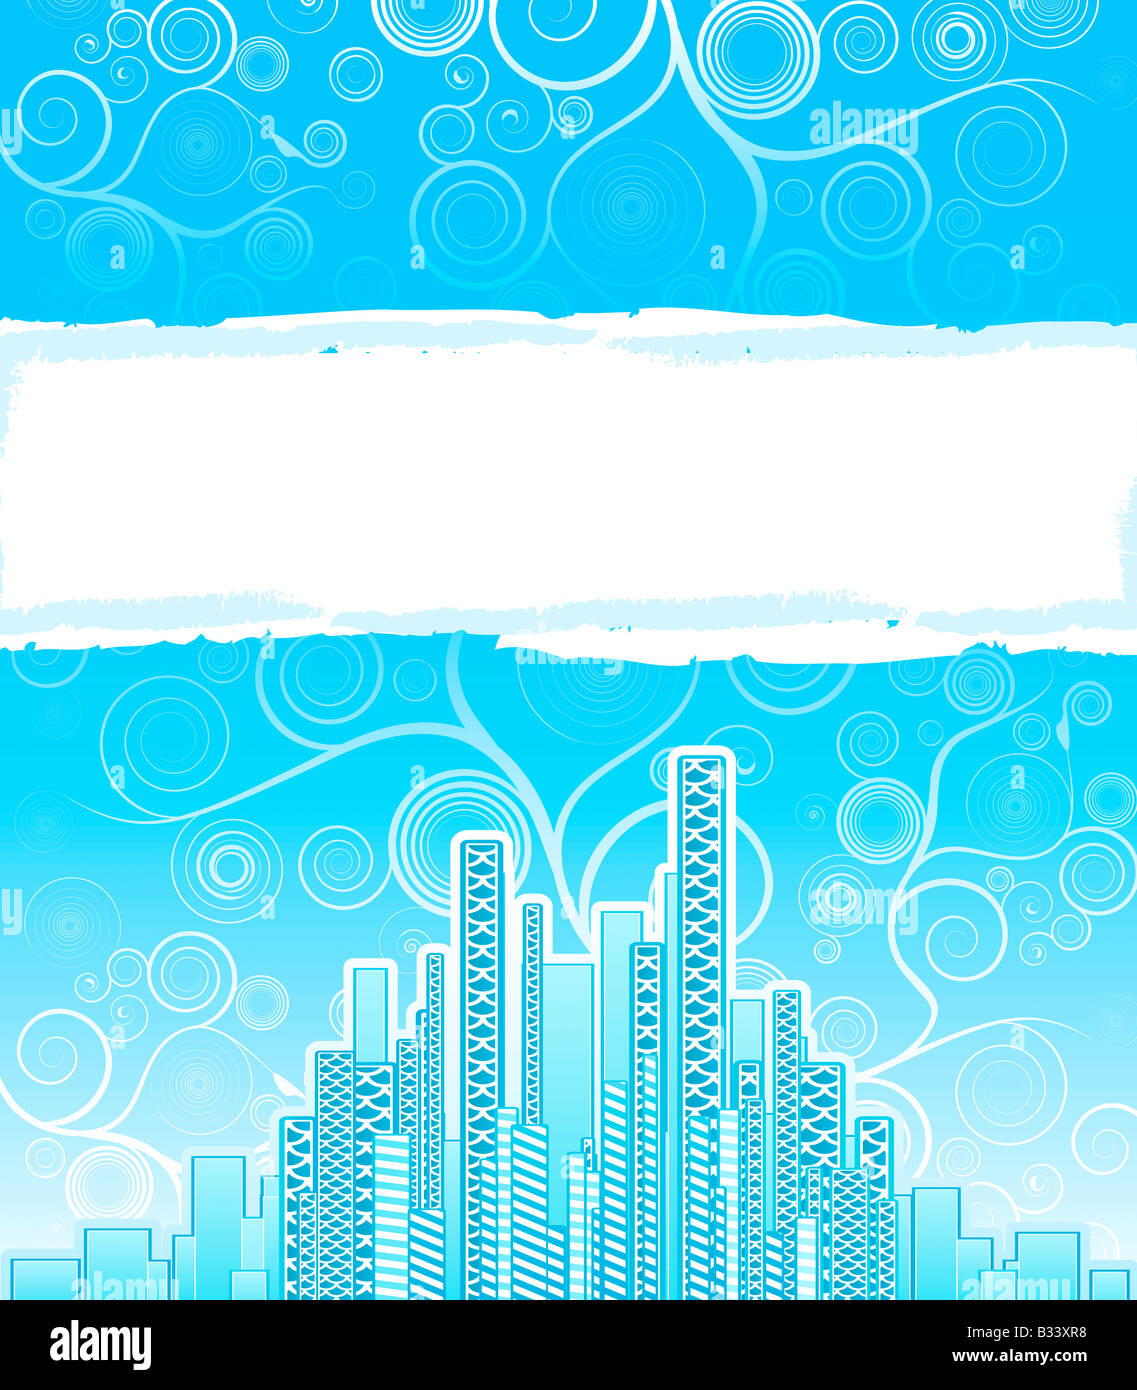 Vector illustration of a modern urban background with floral spirals on the horizon and a big copy space sign Stock Photo